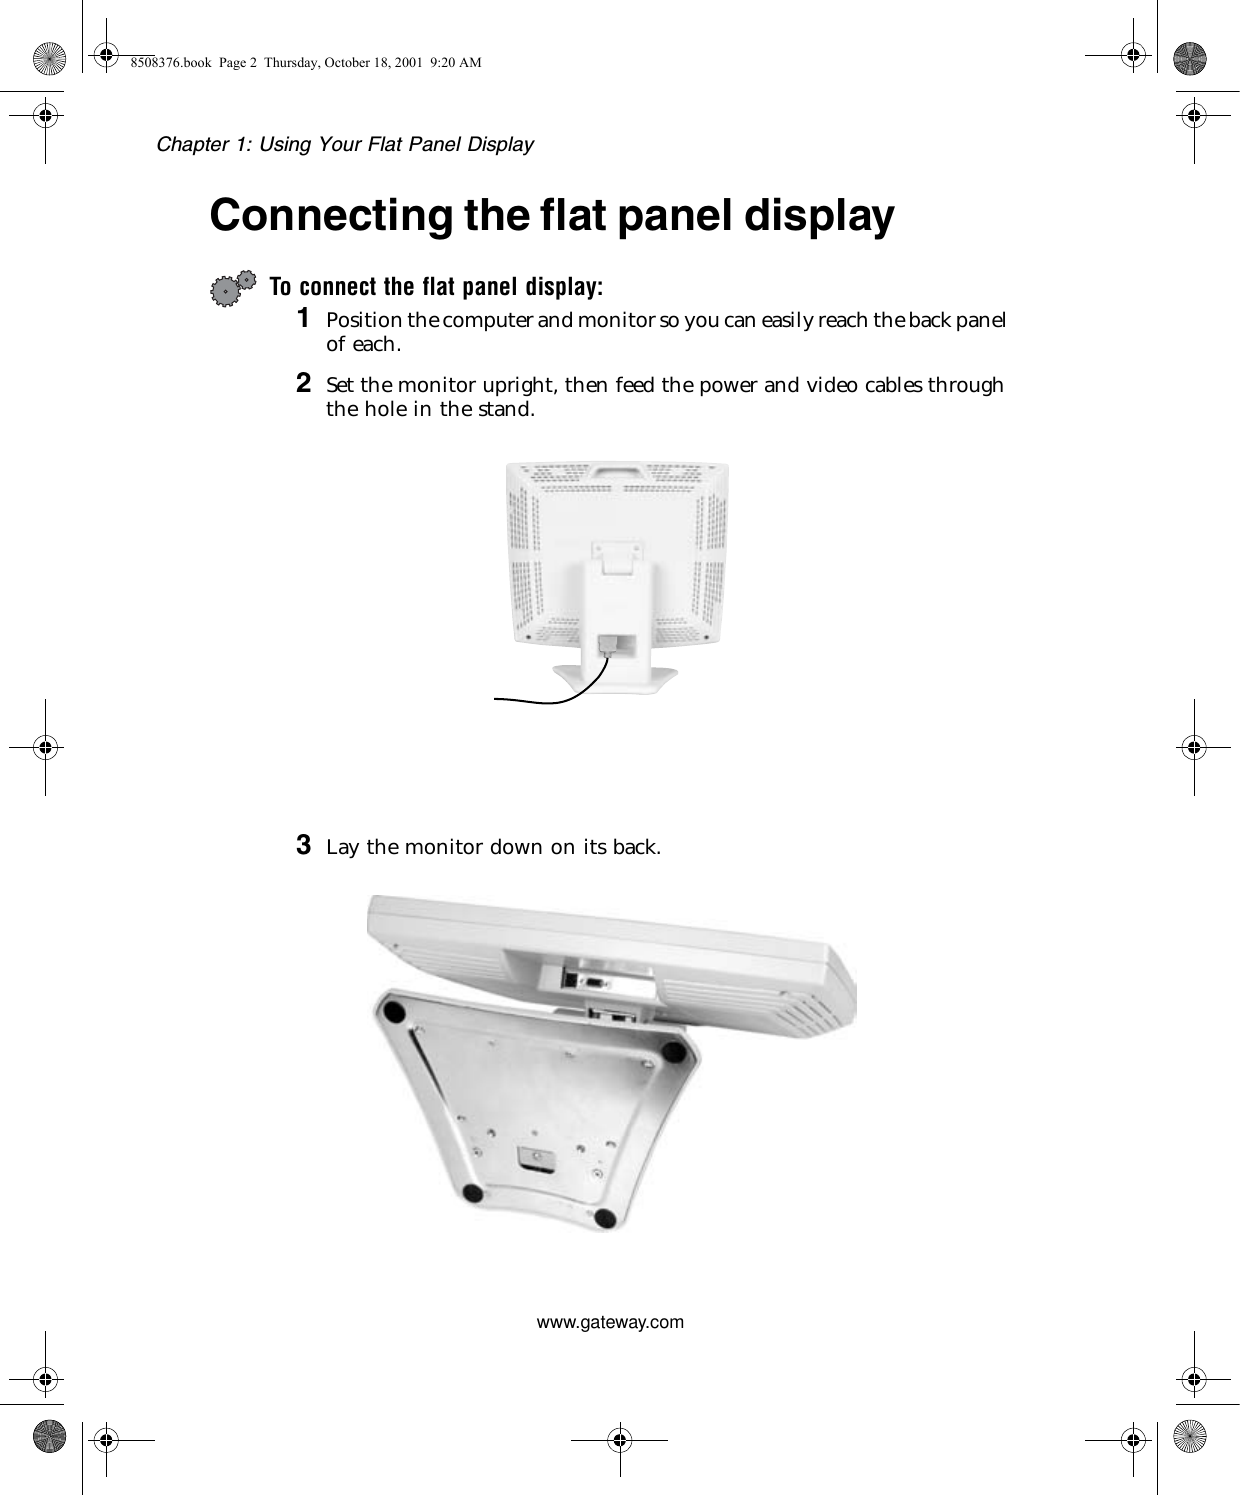 Chapter 1: Using Your Flat Panel Displaywww.gateway.comConnecting the flat panel displayTo connect the flat panel display:1Position the computer and monitor so you can easily reach the back panel of each.2Set the monitor upright, then feed the power and video cables through the hole in the stand.3Lay the monitor down on its back.8508376.book  Page 2  Thursday, October 18, 2001  9:20 AM